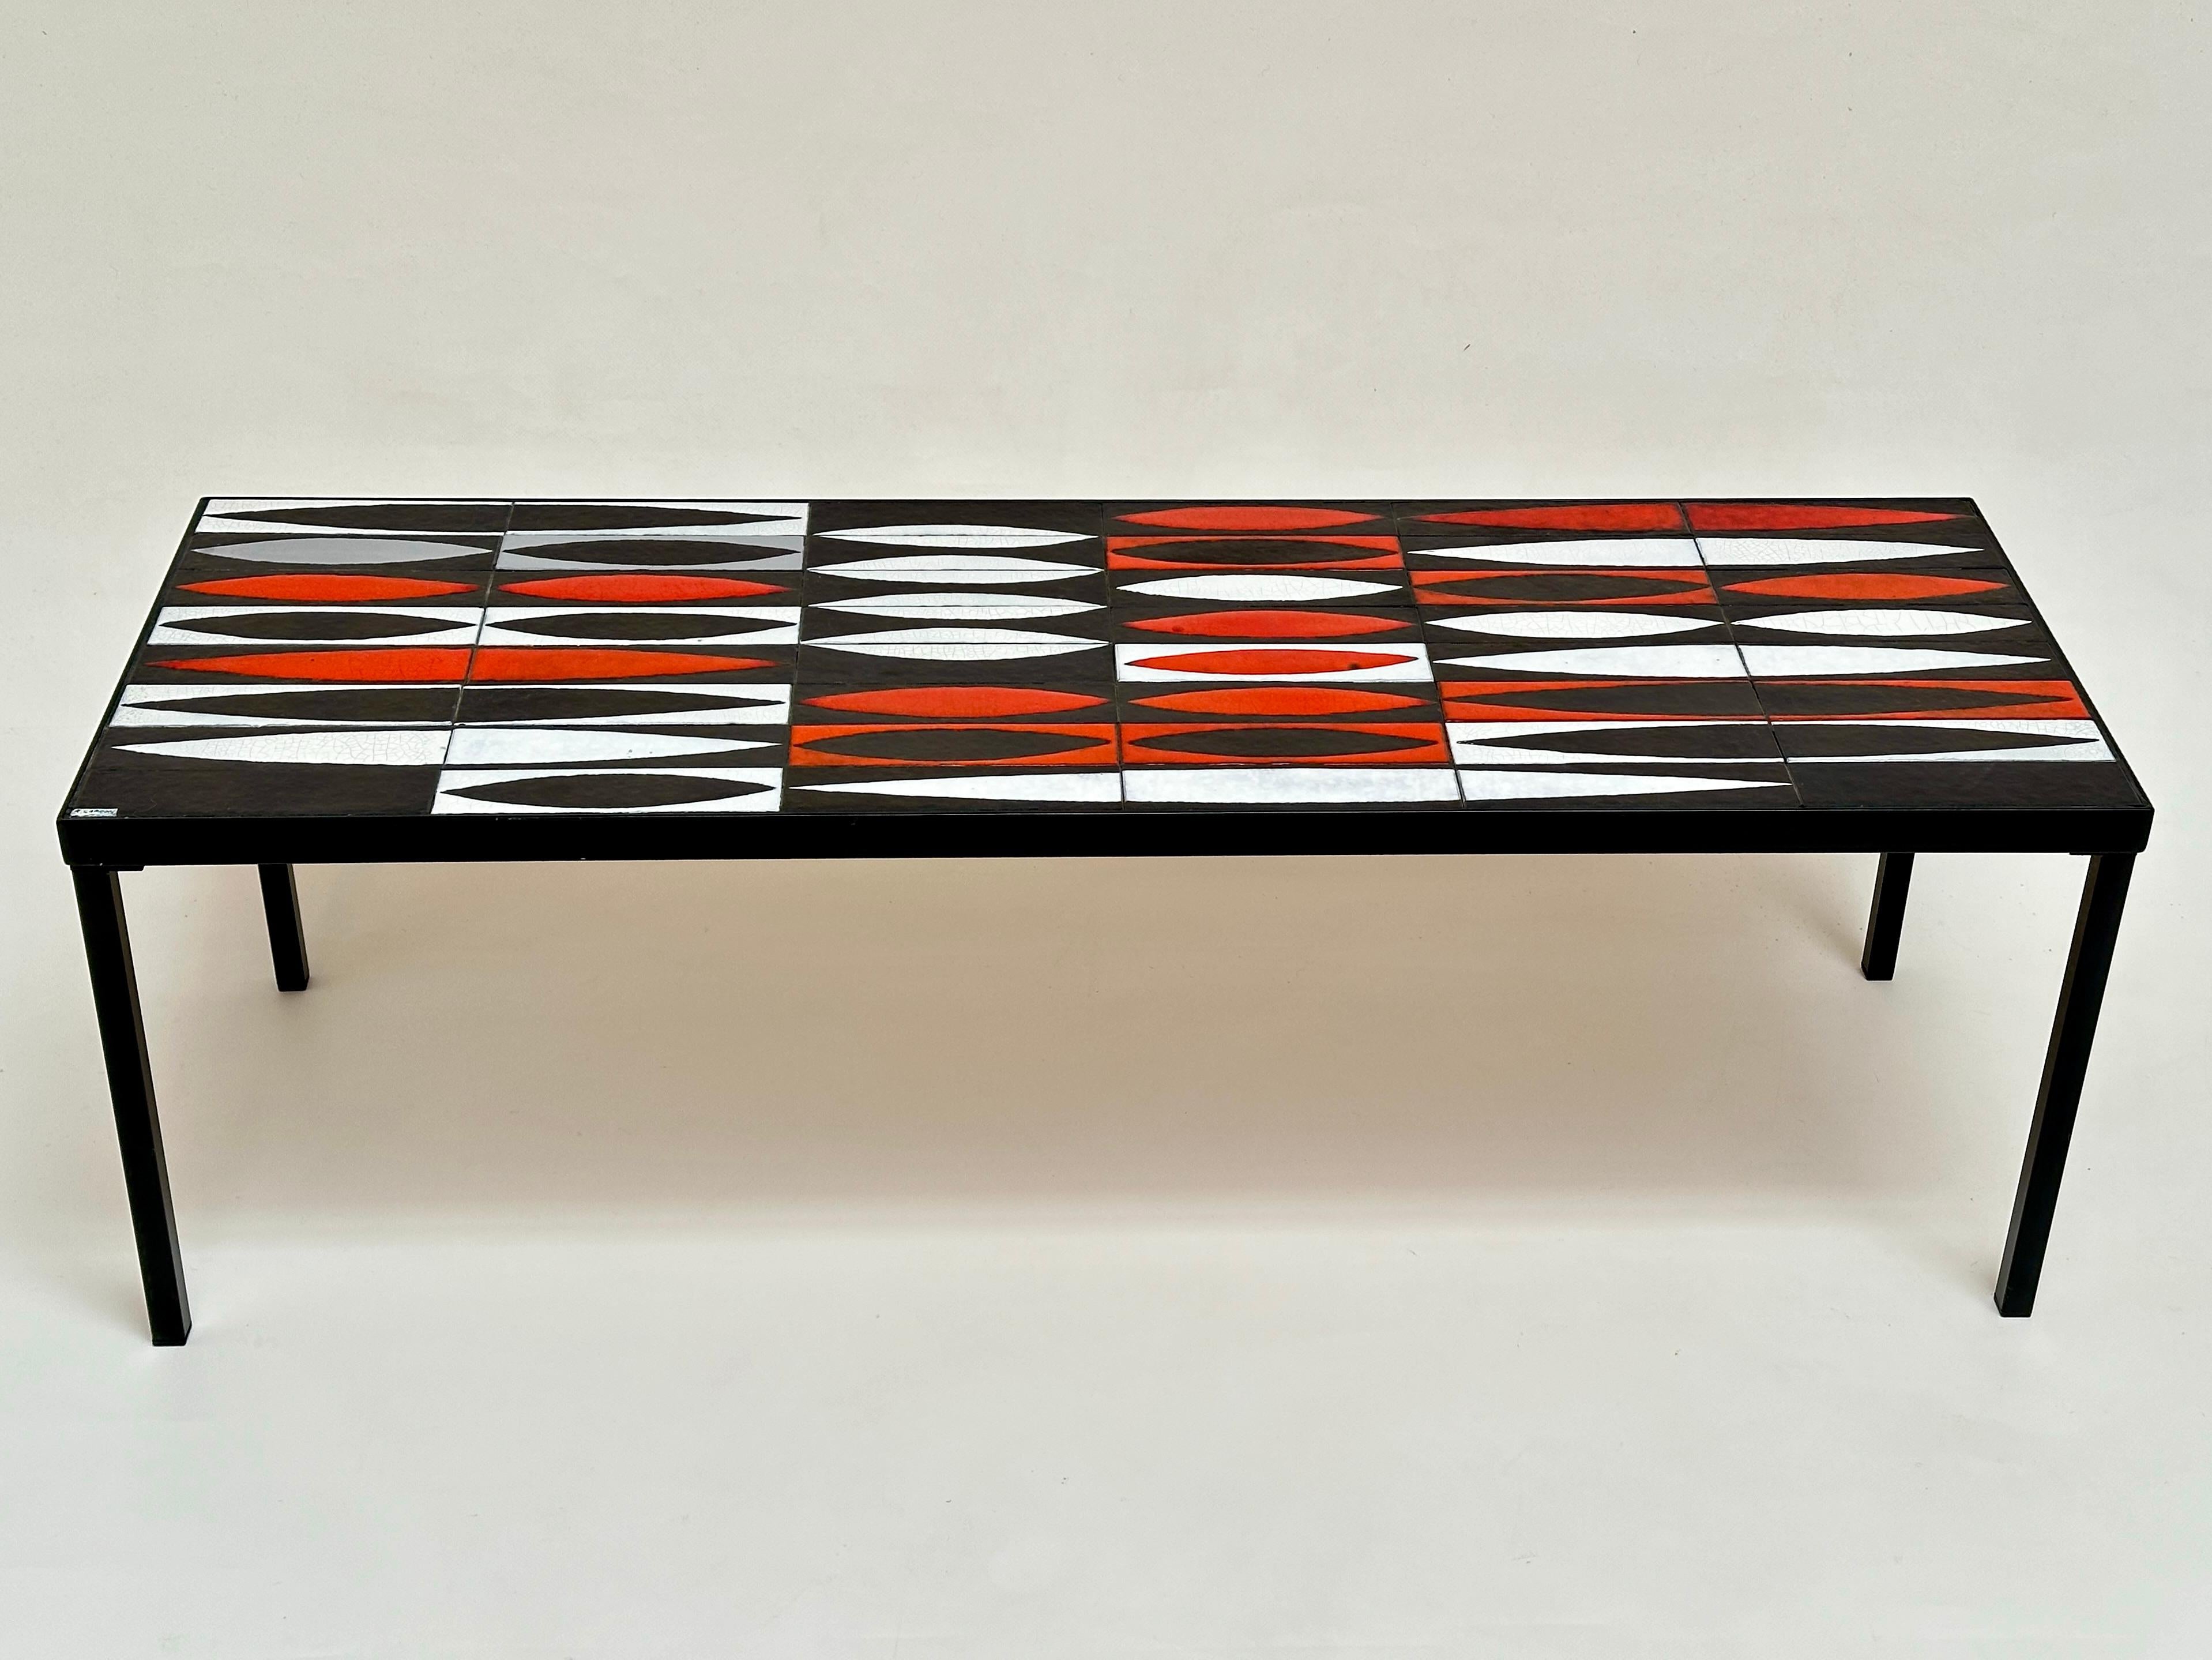 French Iconic Navettes Low Table, Roger Capron, Vallauris c. 1960 For Sale